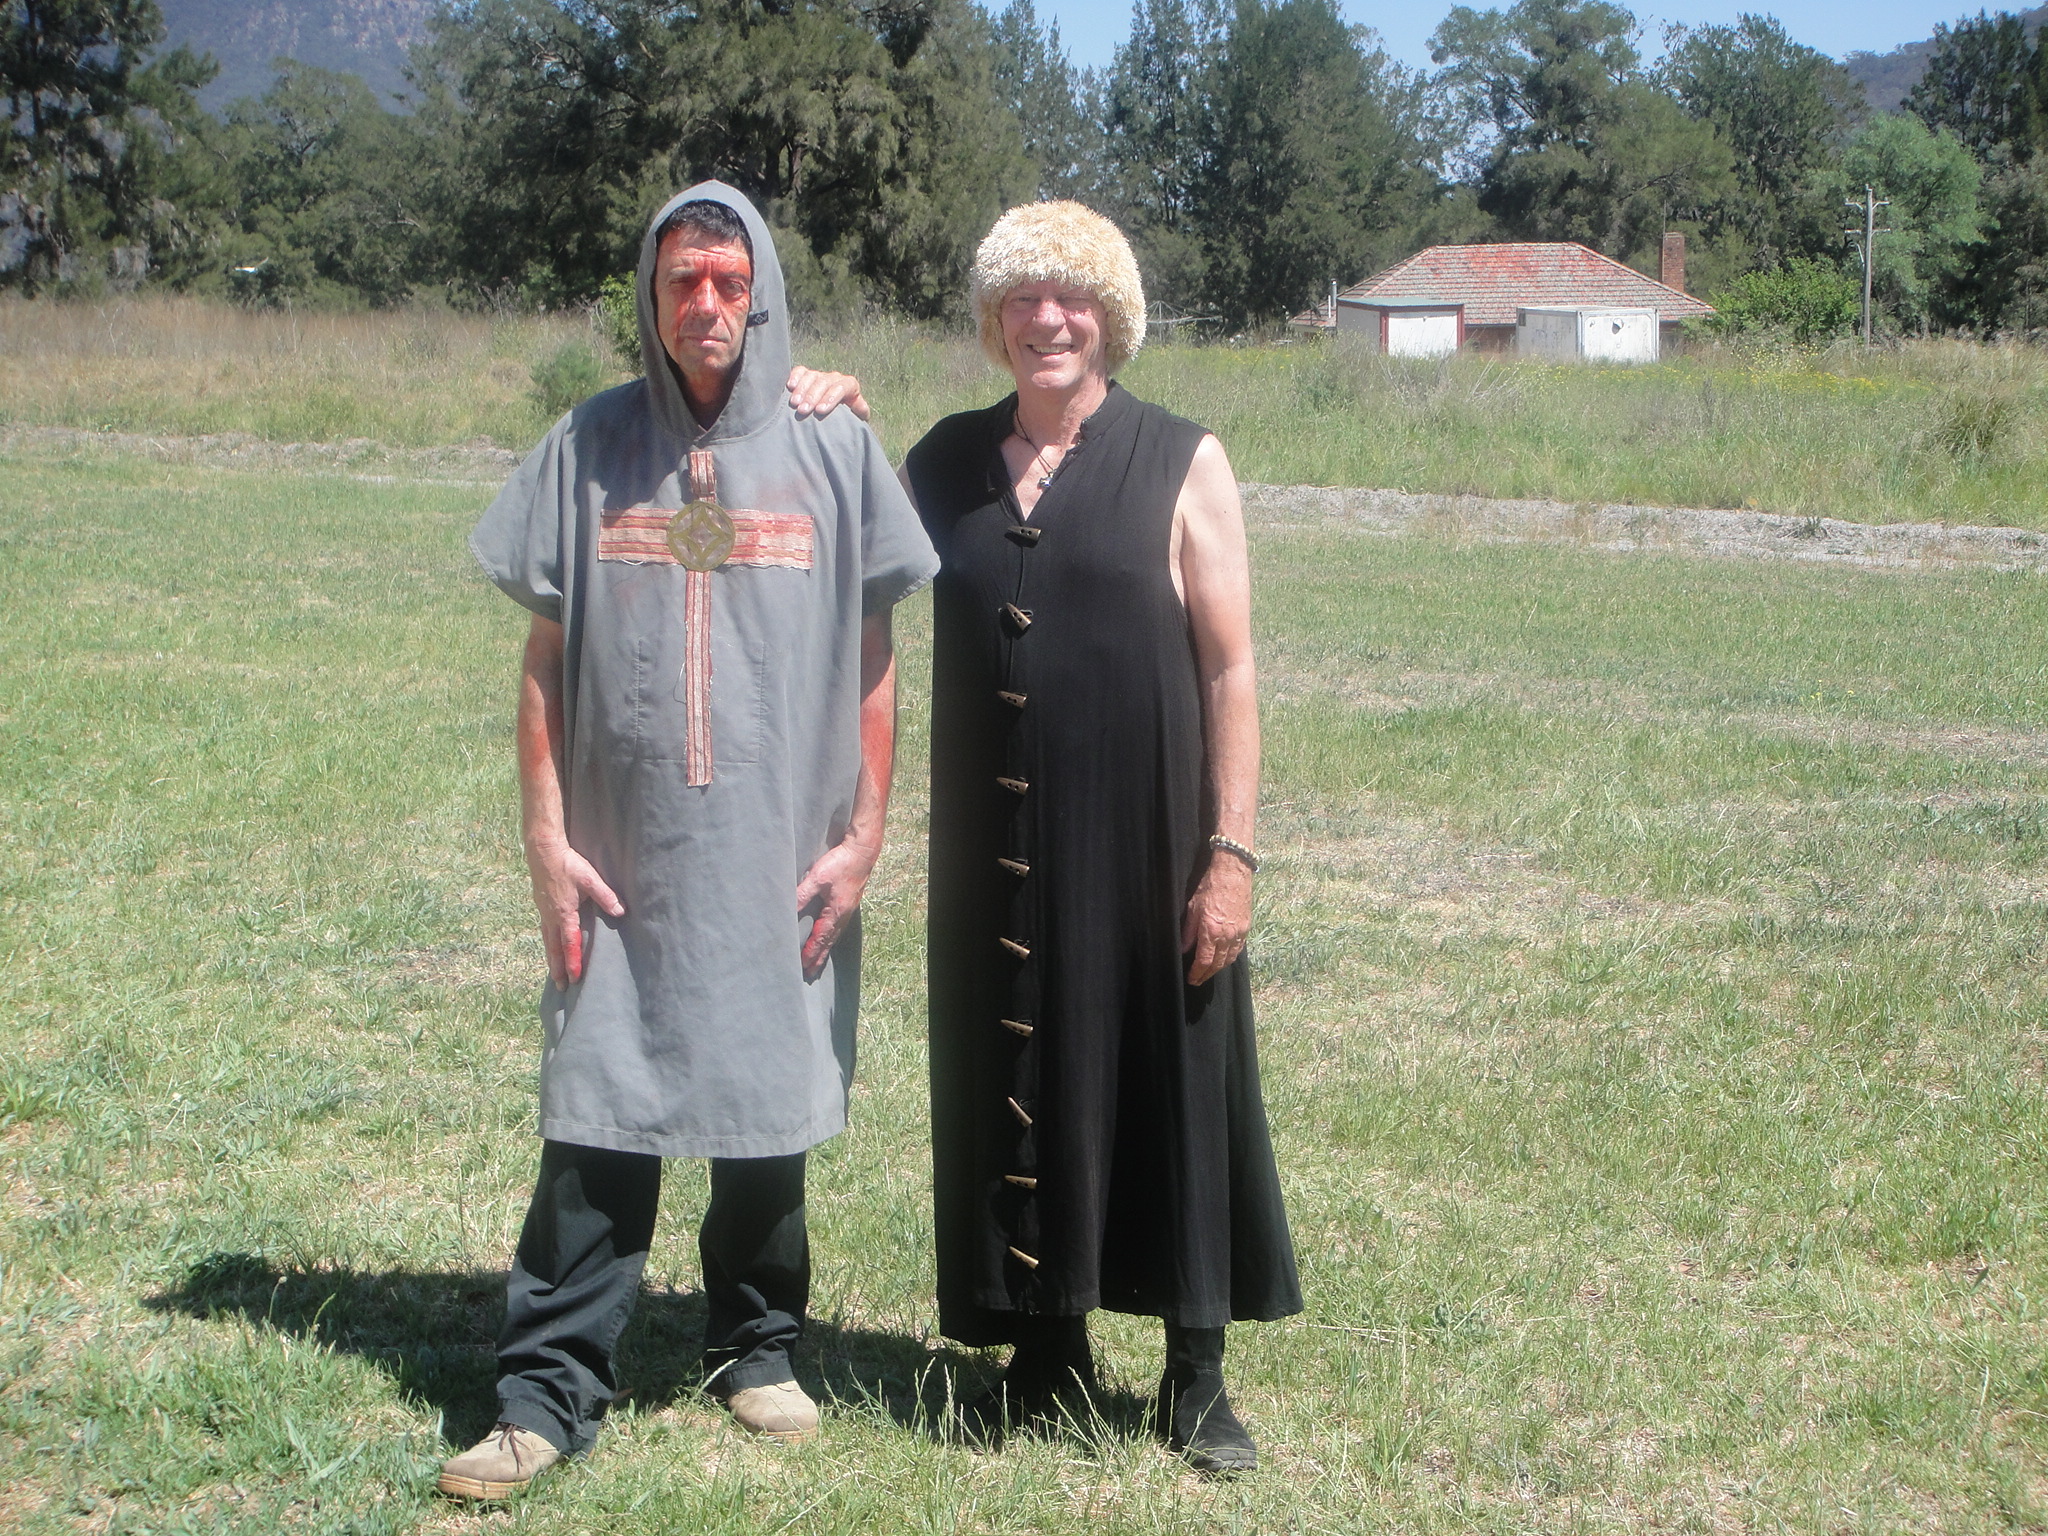 Tony Dreise as Roman, one of battlefield generals and me as Josefa the Intoner